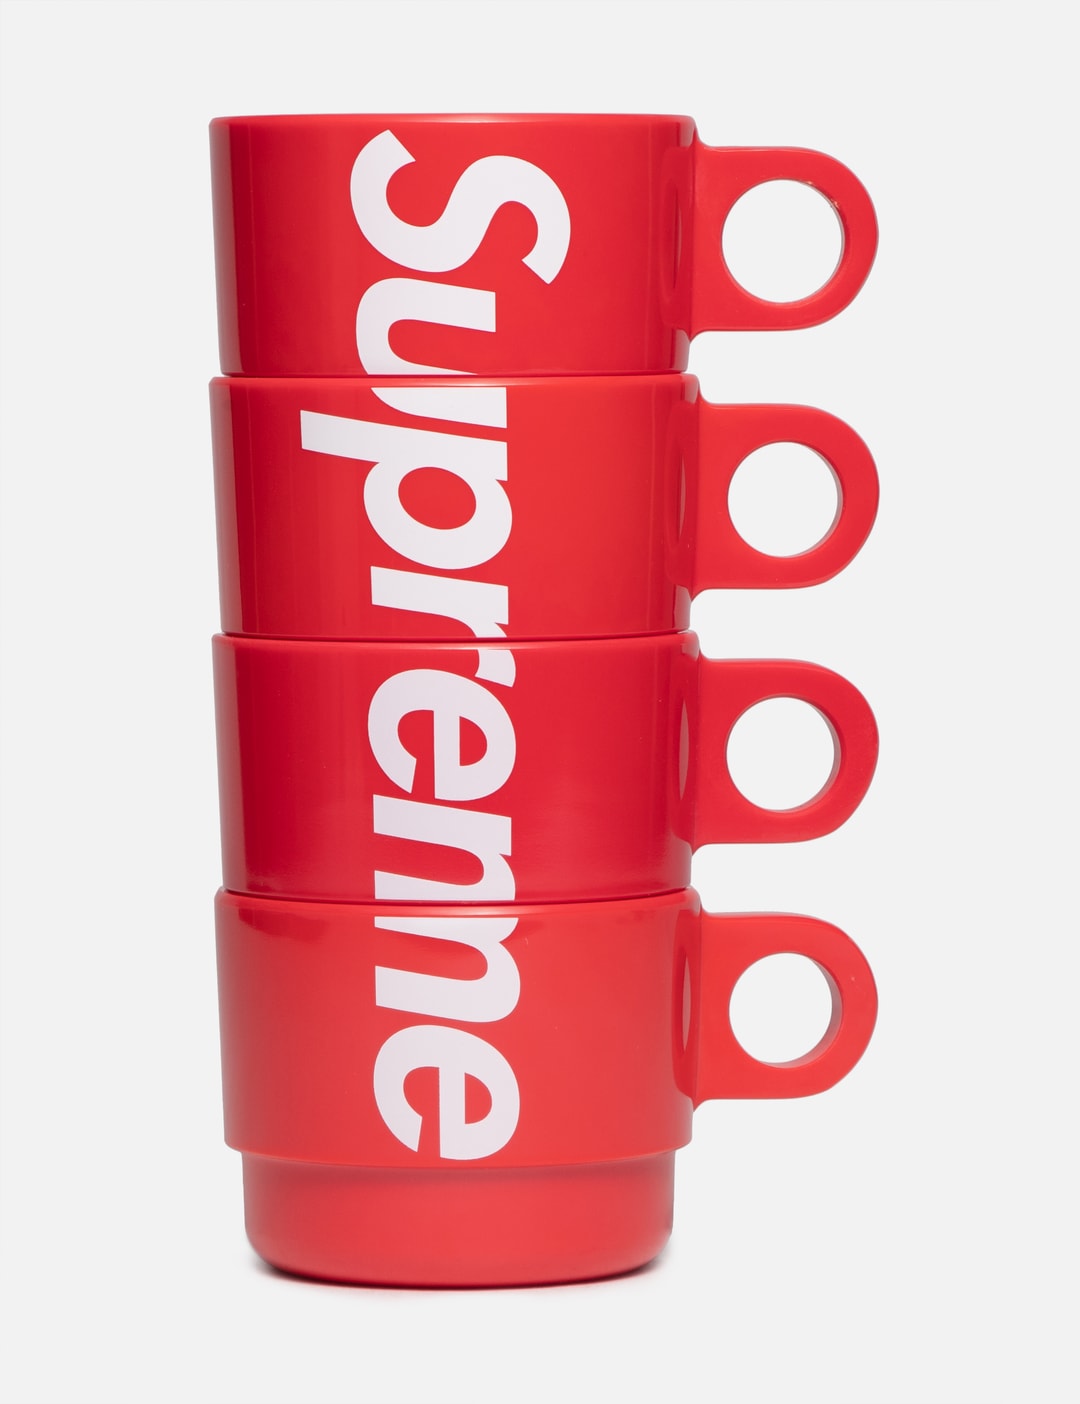 Supreme - SUPREME 3 TRAVEL BAGS SET  HBX - Globally Curated Fashion and  Lifestyle by Hypebeast